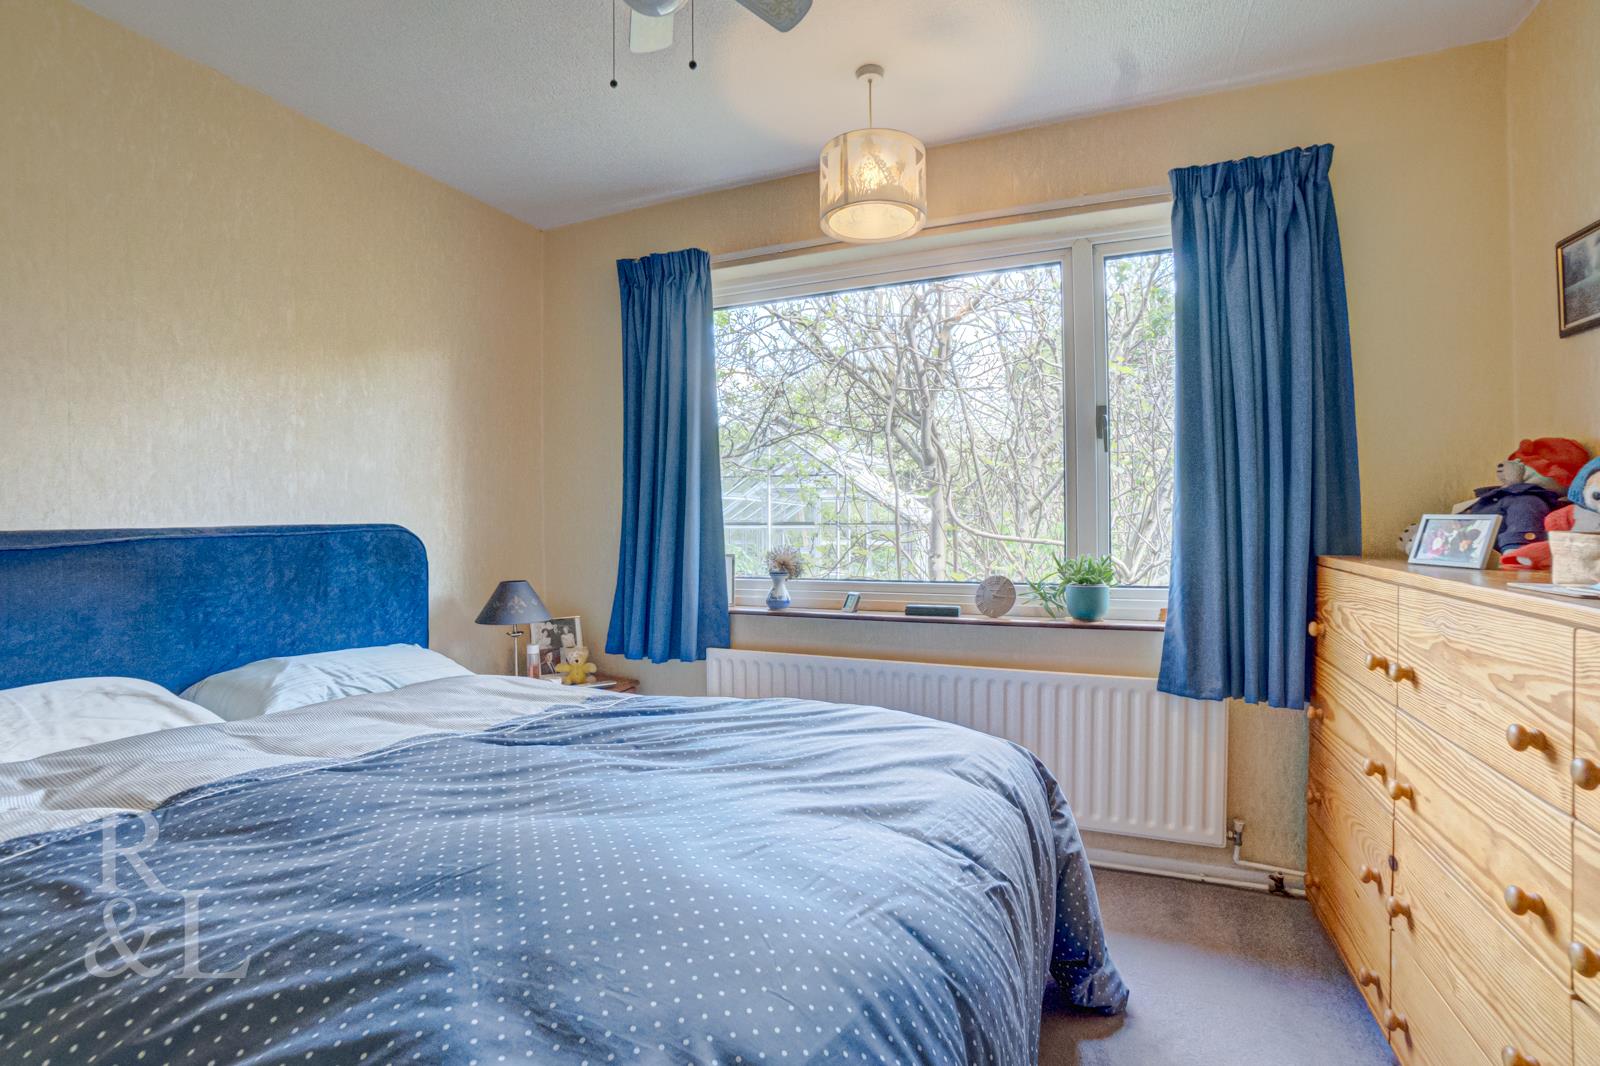 Property image for Victoria Road, Bunny, Nottingham